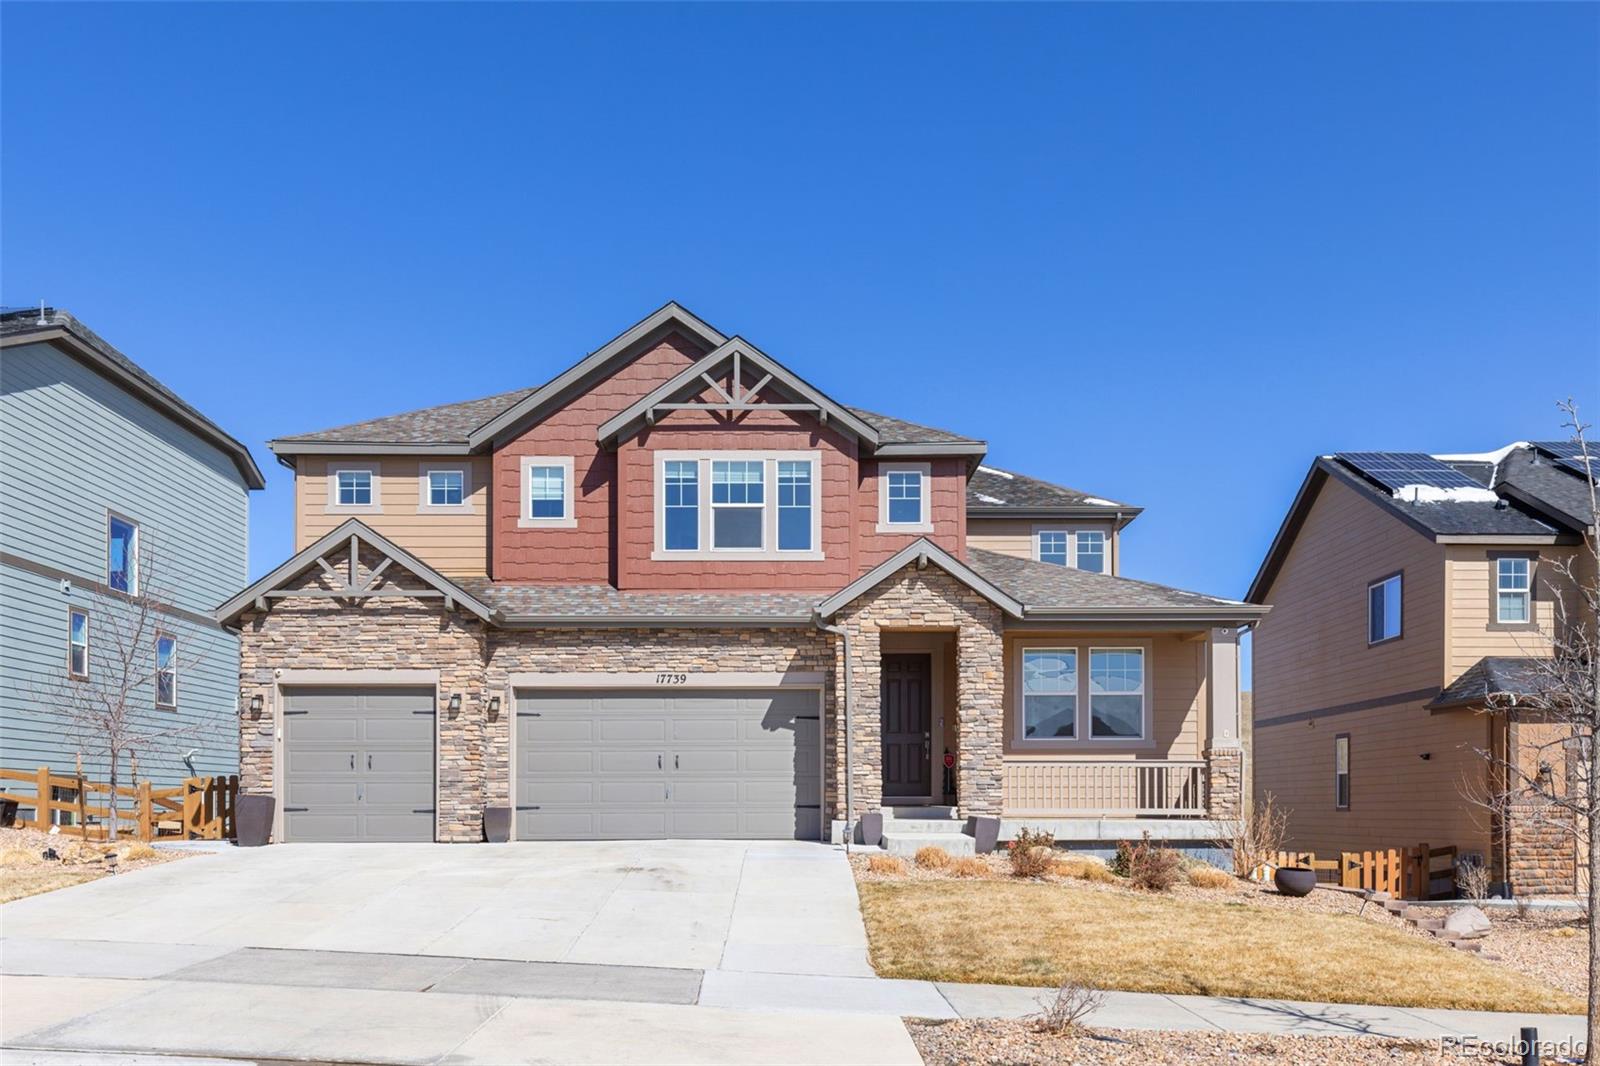 17739 W 95th Place, arvada MLS: 4326571 Beds: 4 Baths: 4 Price: $985,000